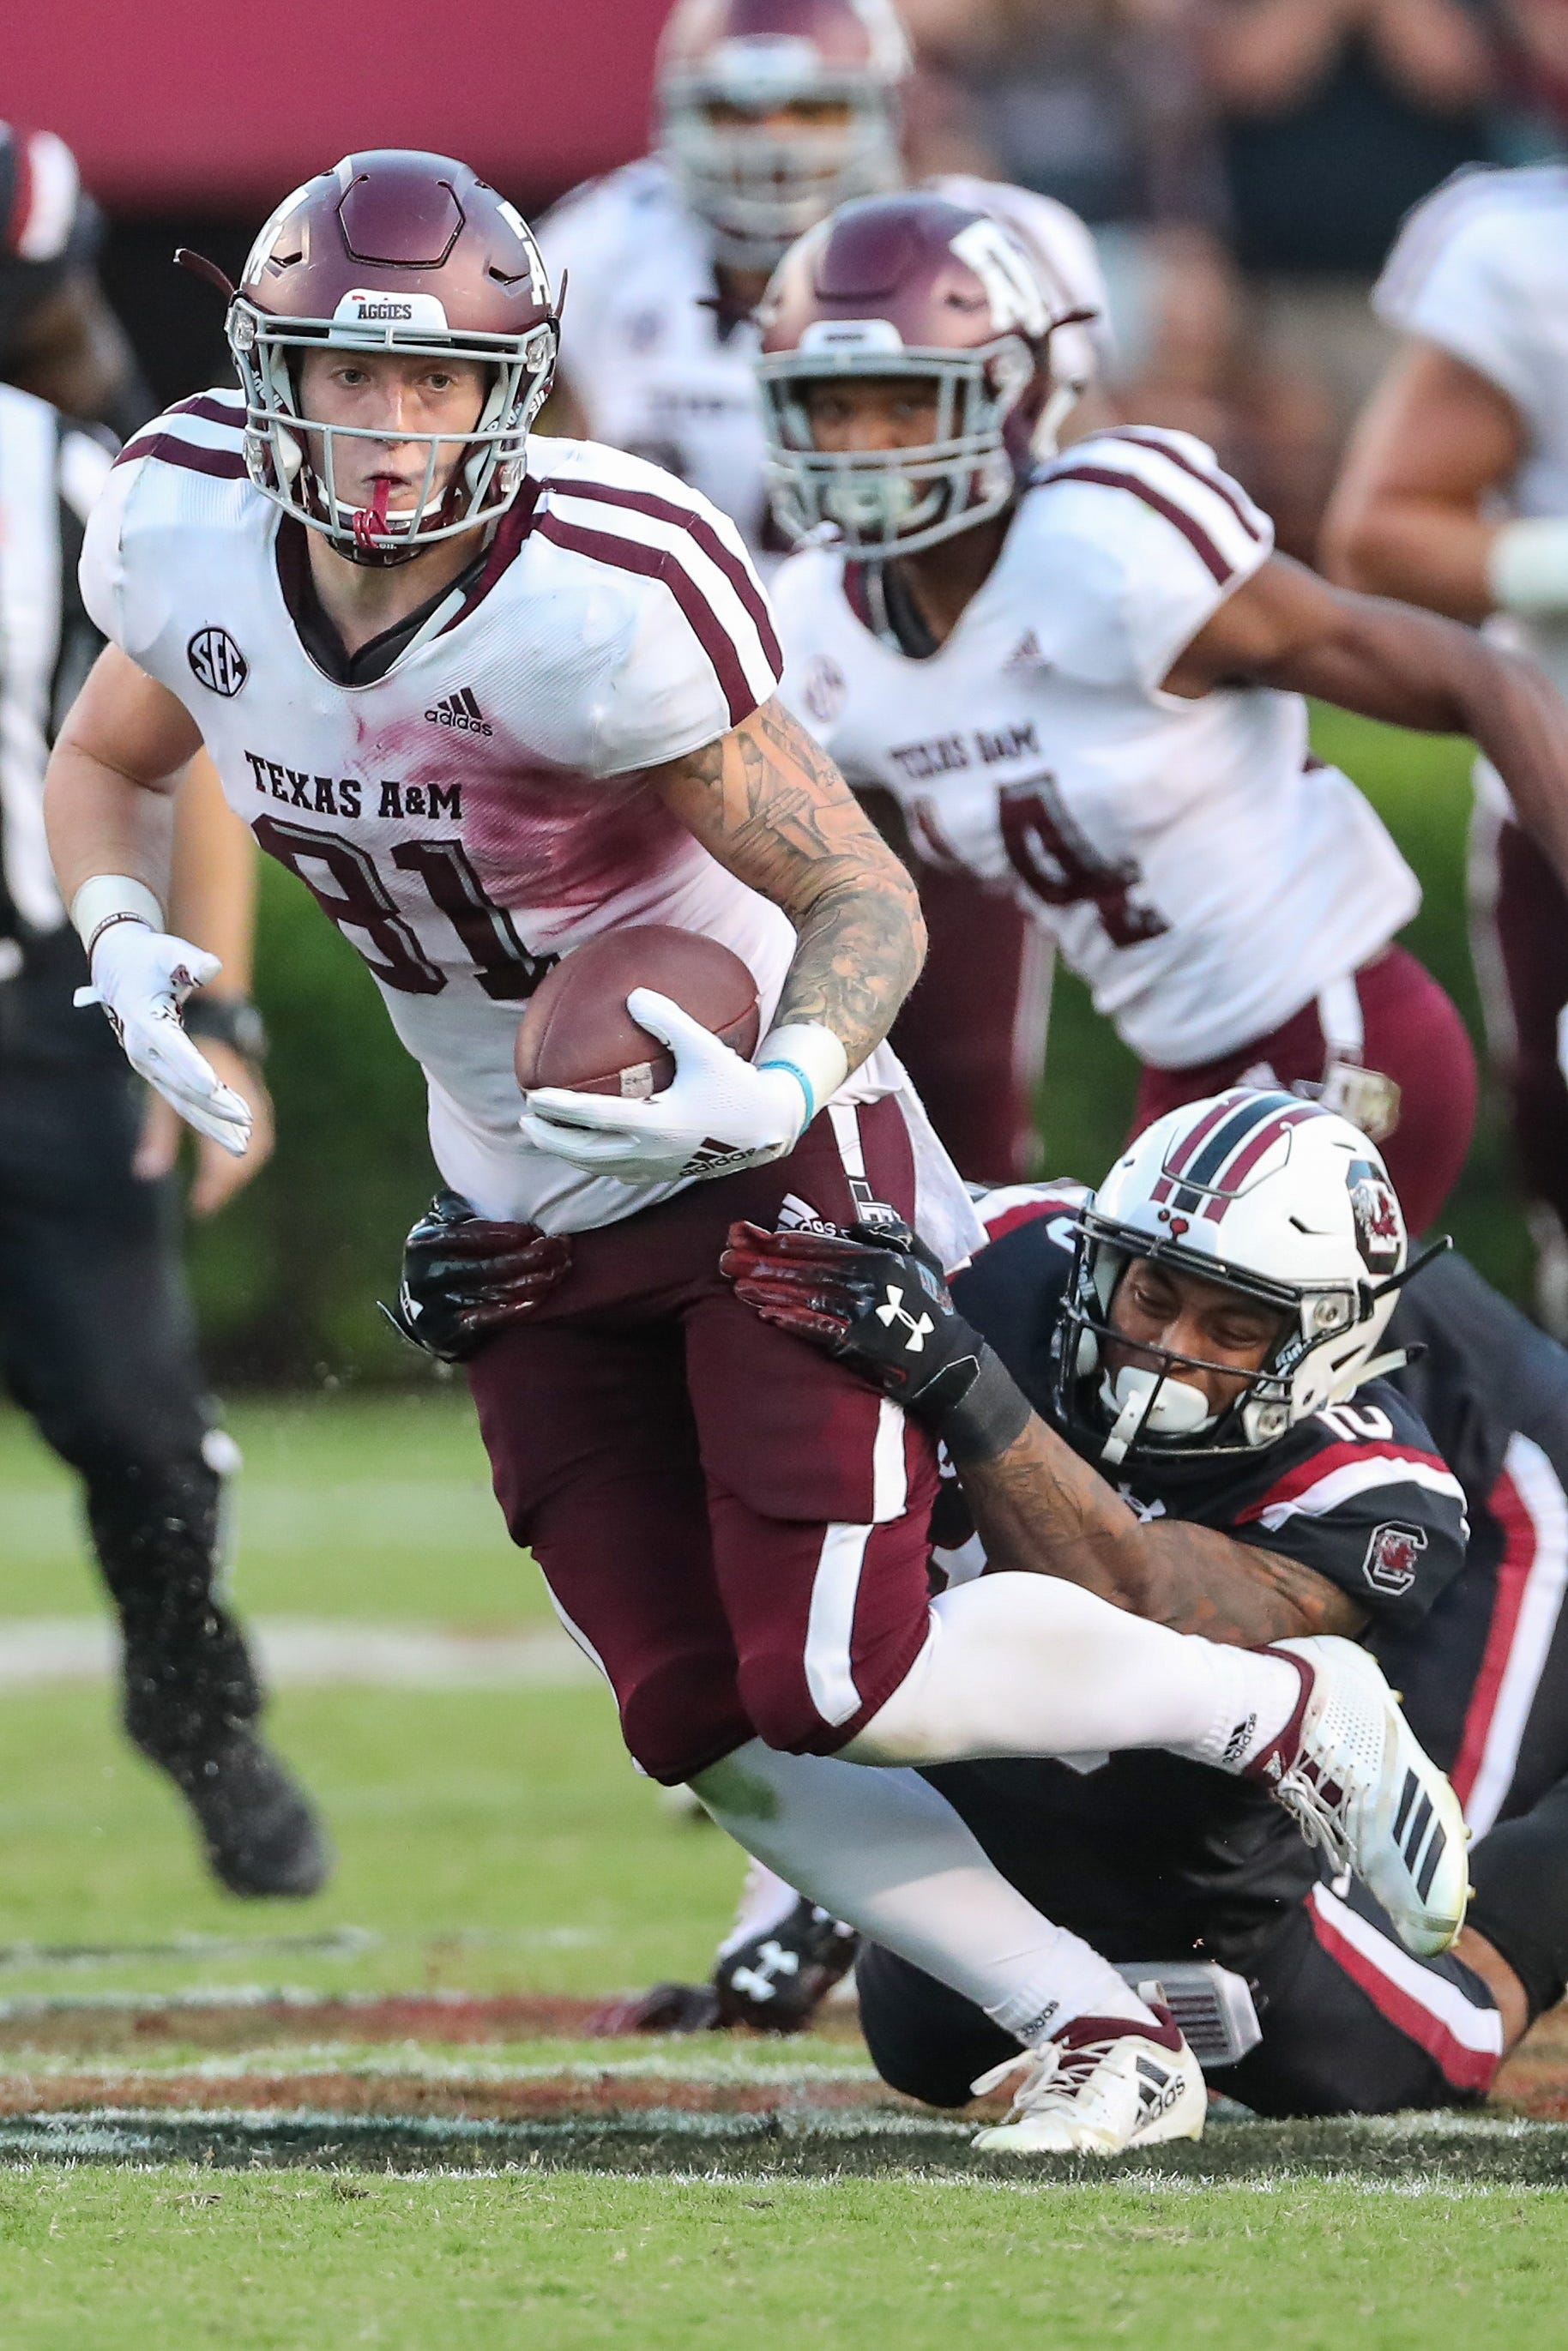 Dougherty: Jace Sternberger facing steep learning curve